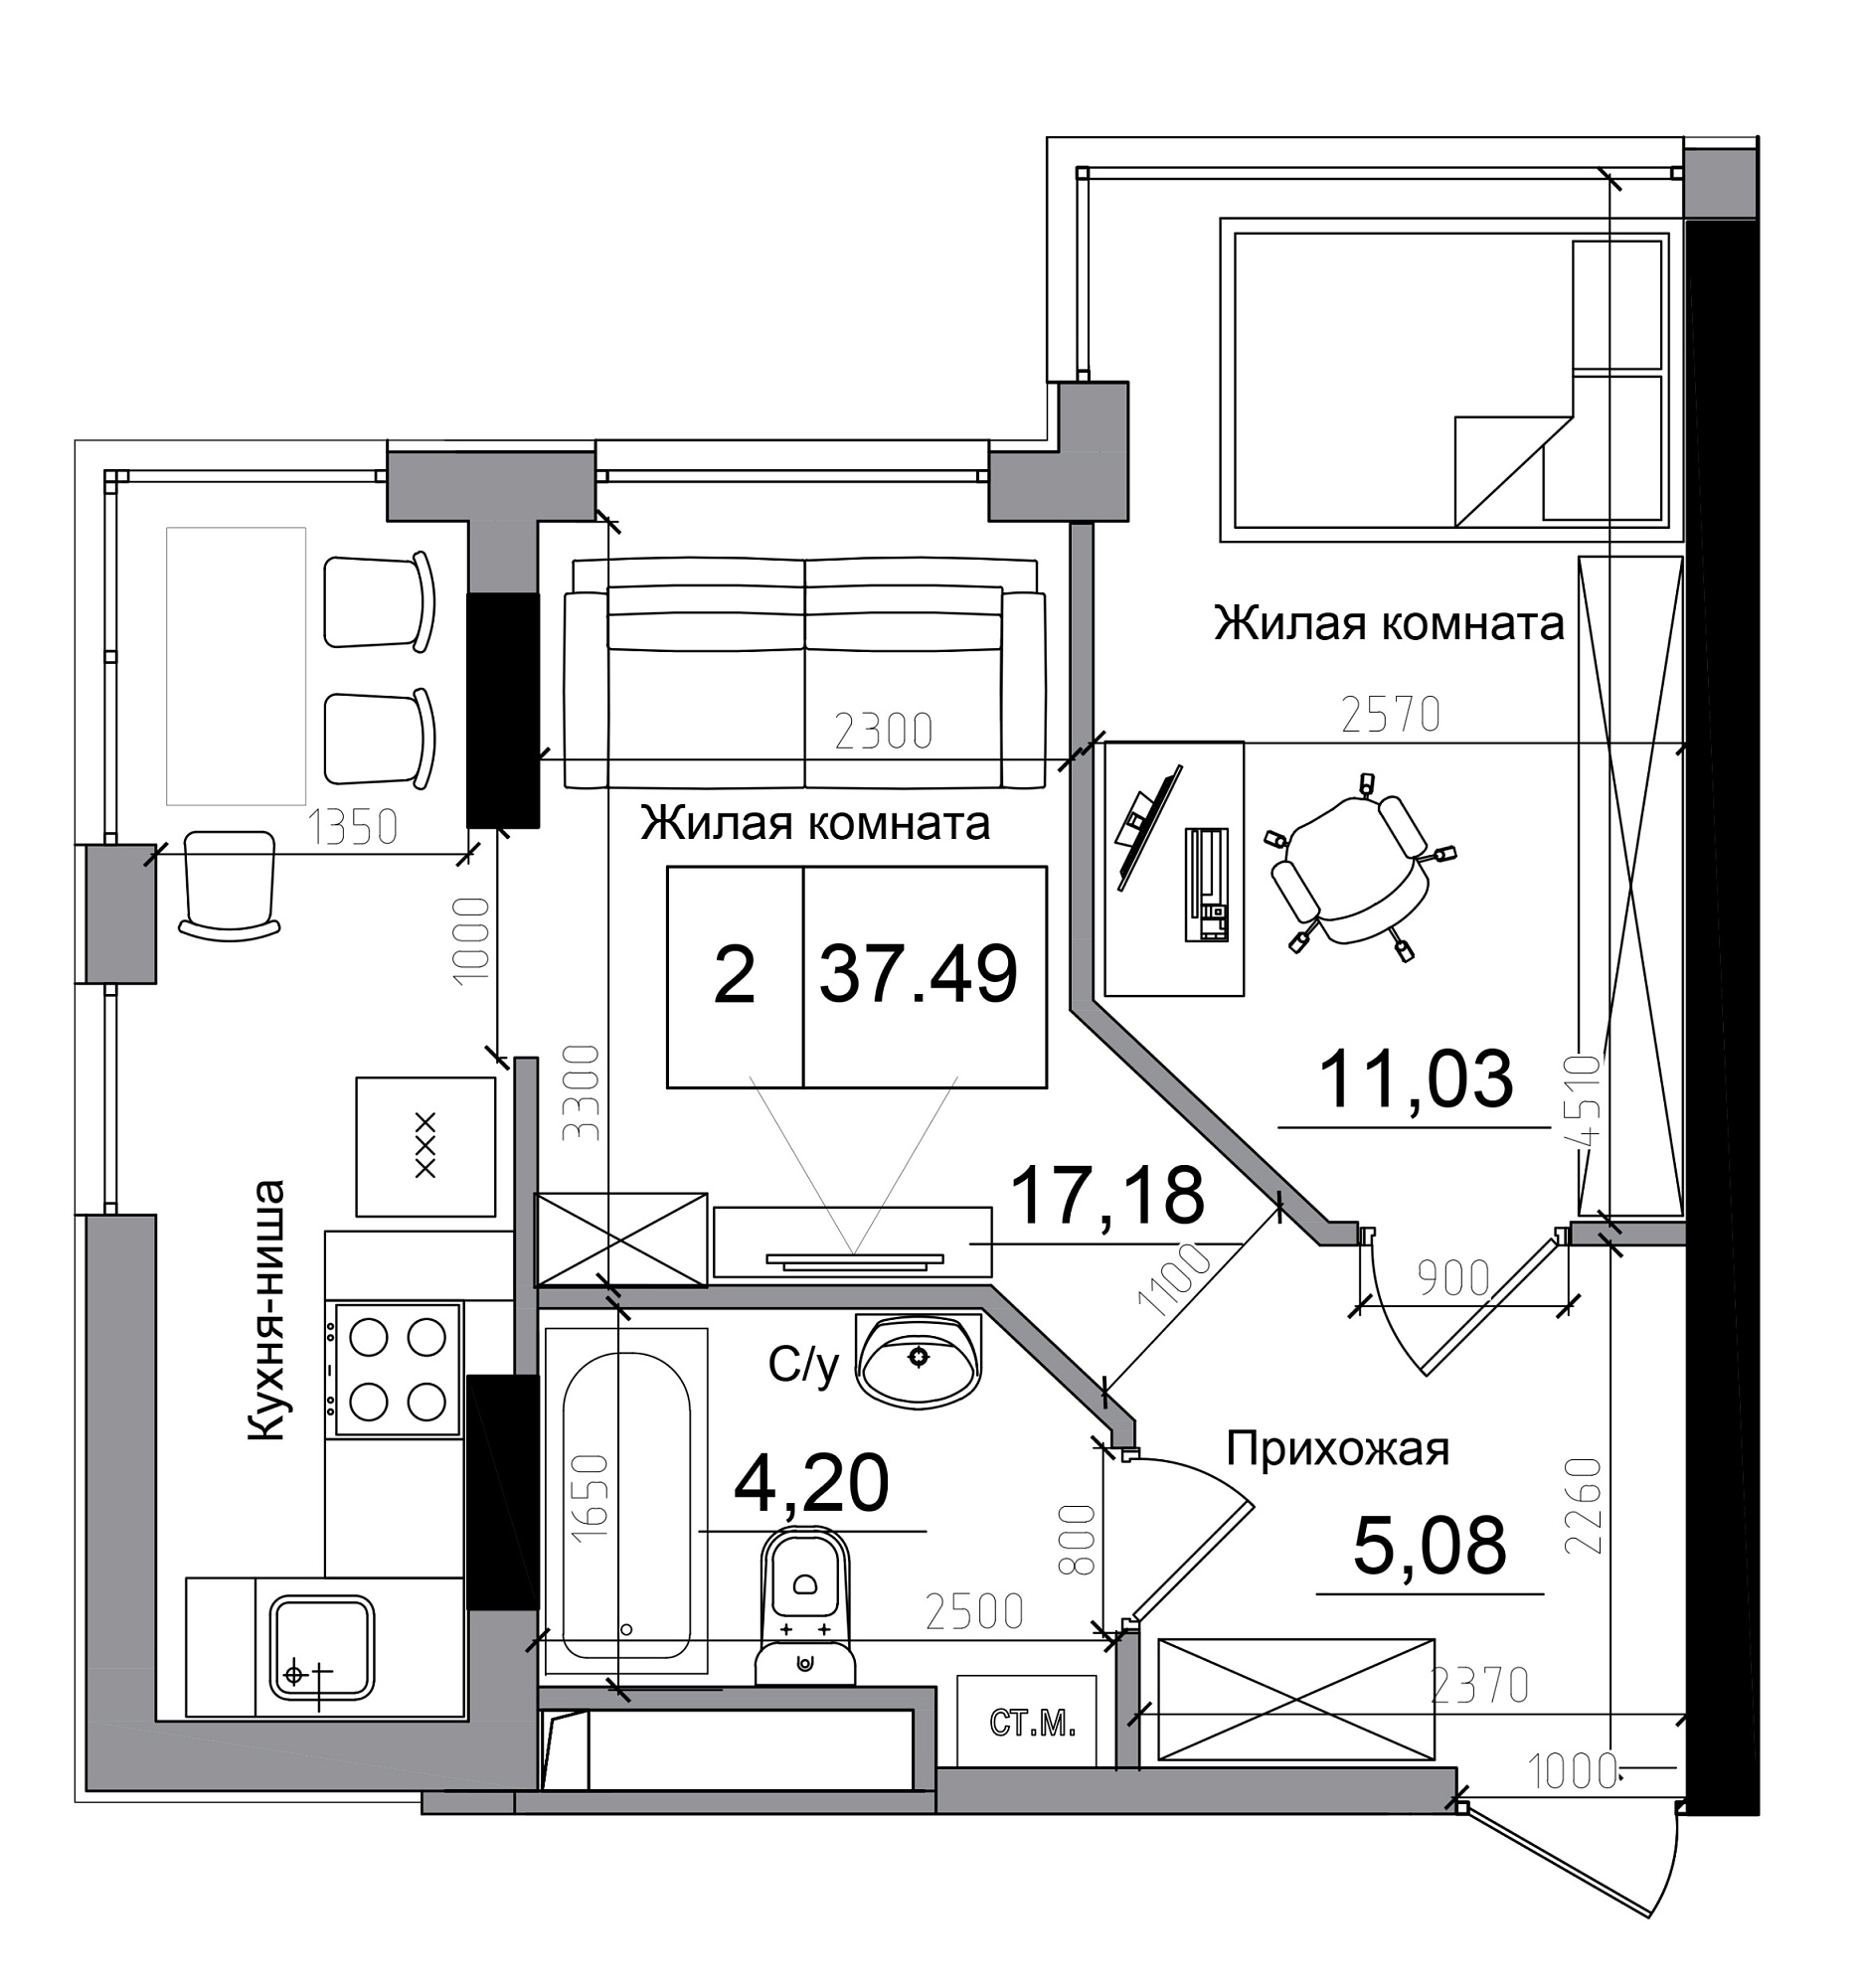 Planning 1-rm flats area 37.49m2, AB-11-12/00005.